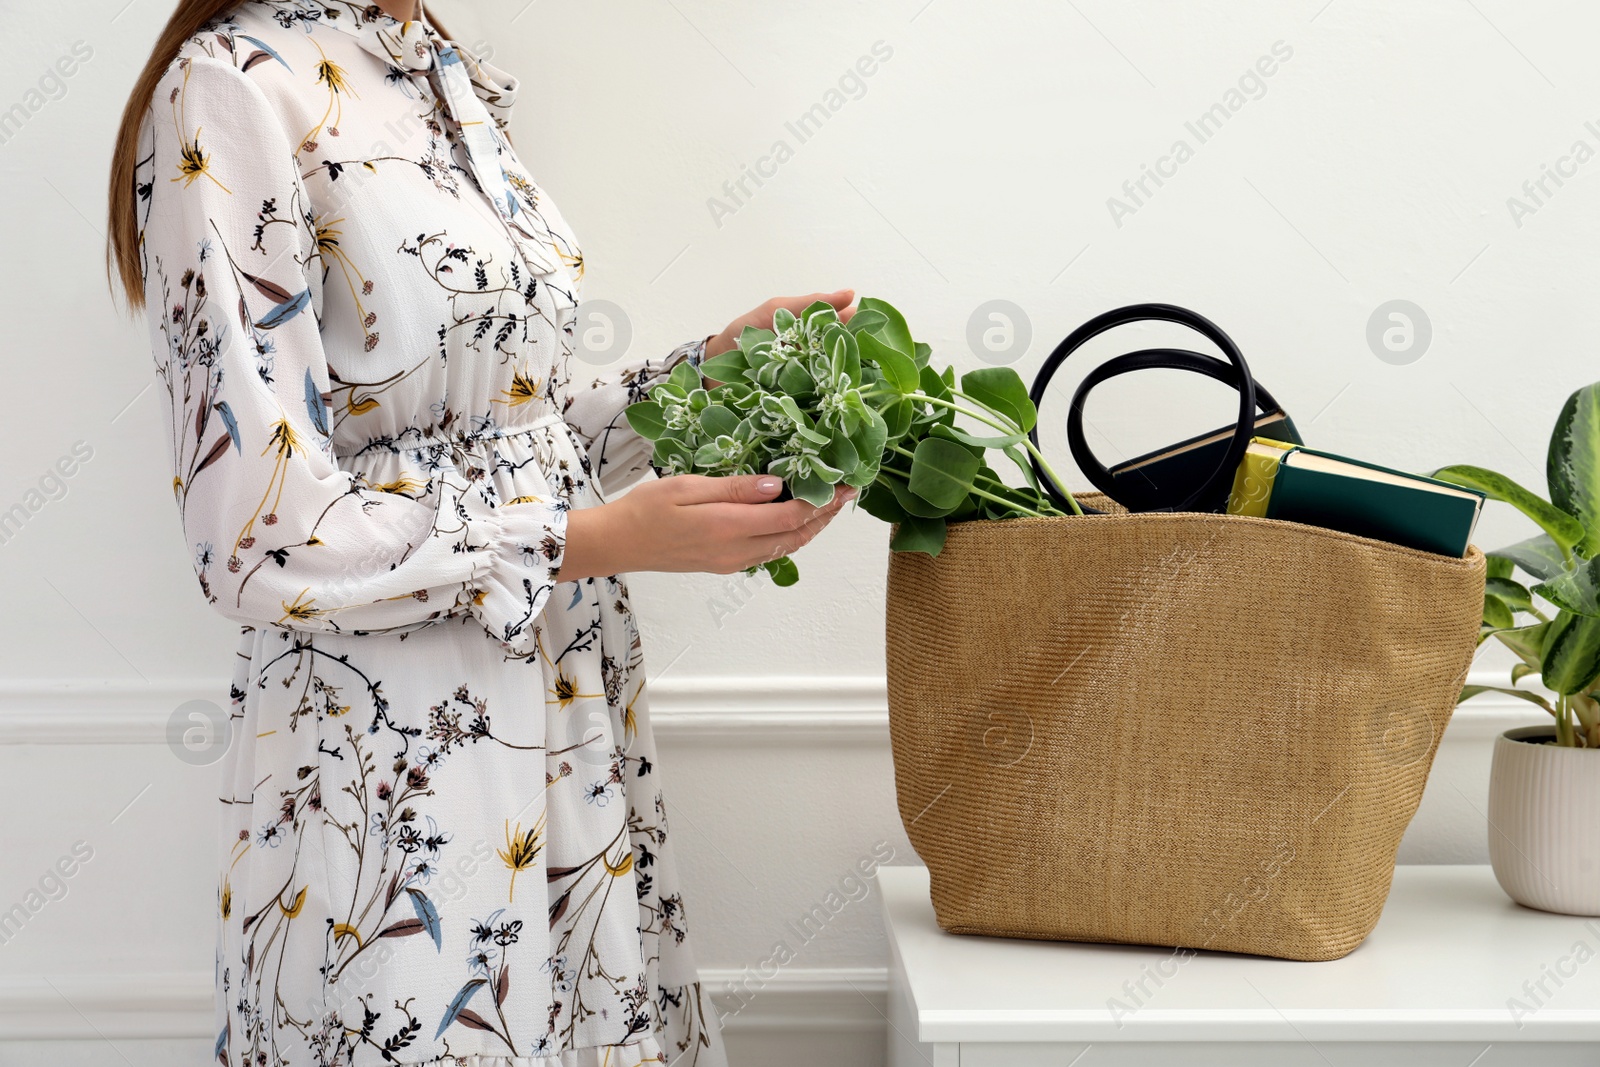 Photo of Woman putting plant in beach bag indoors, closeup